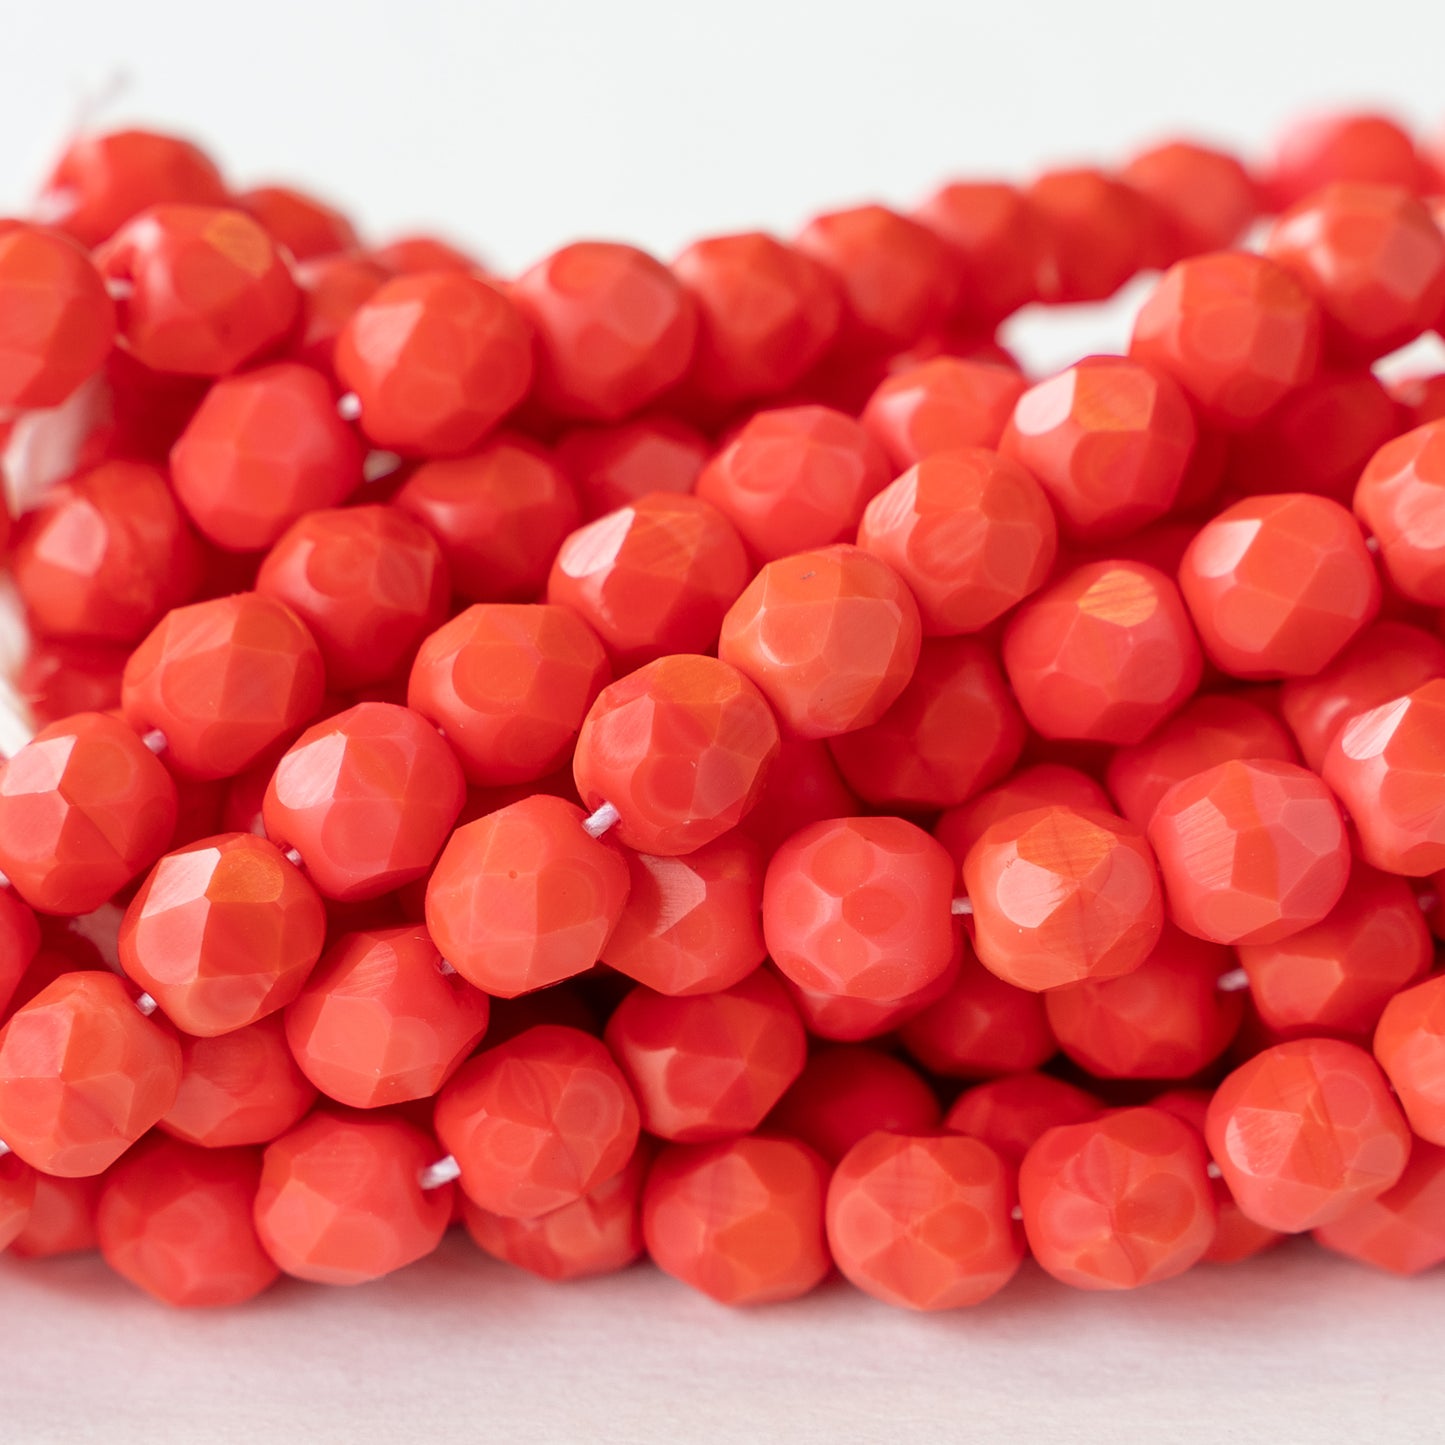 Load image into Gallery viewer, 6mm Round Firepolished Beads - Opaque Coral Red - 25 beads
